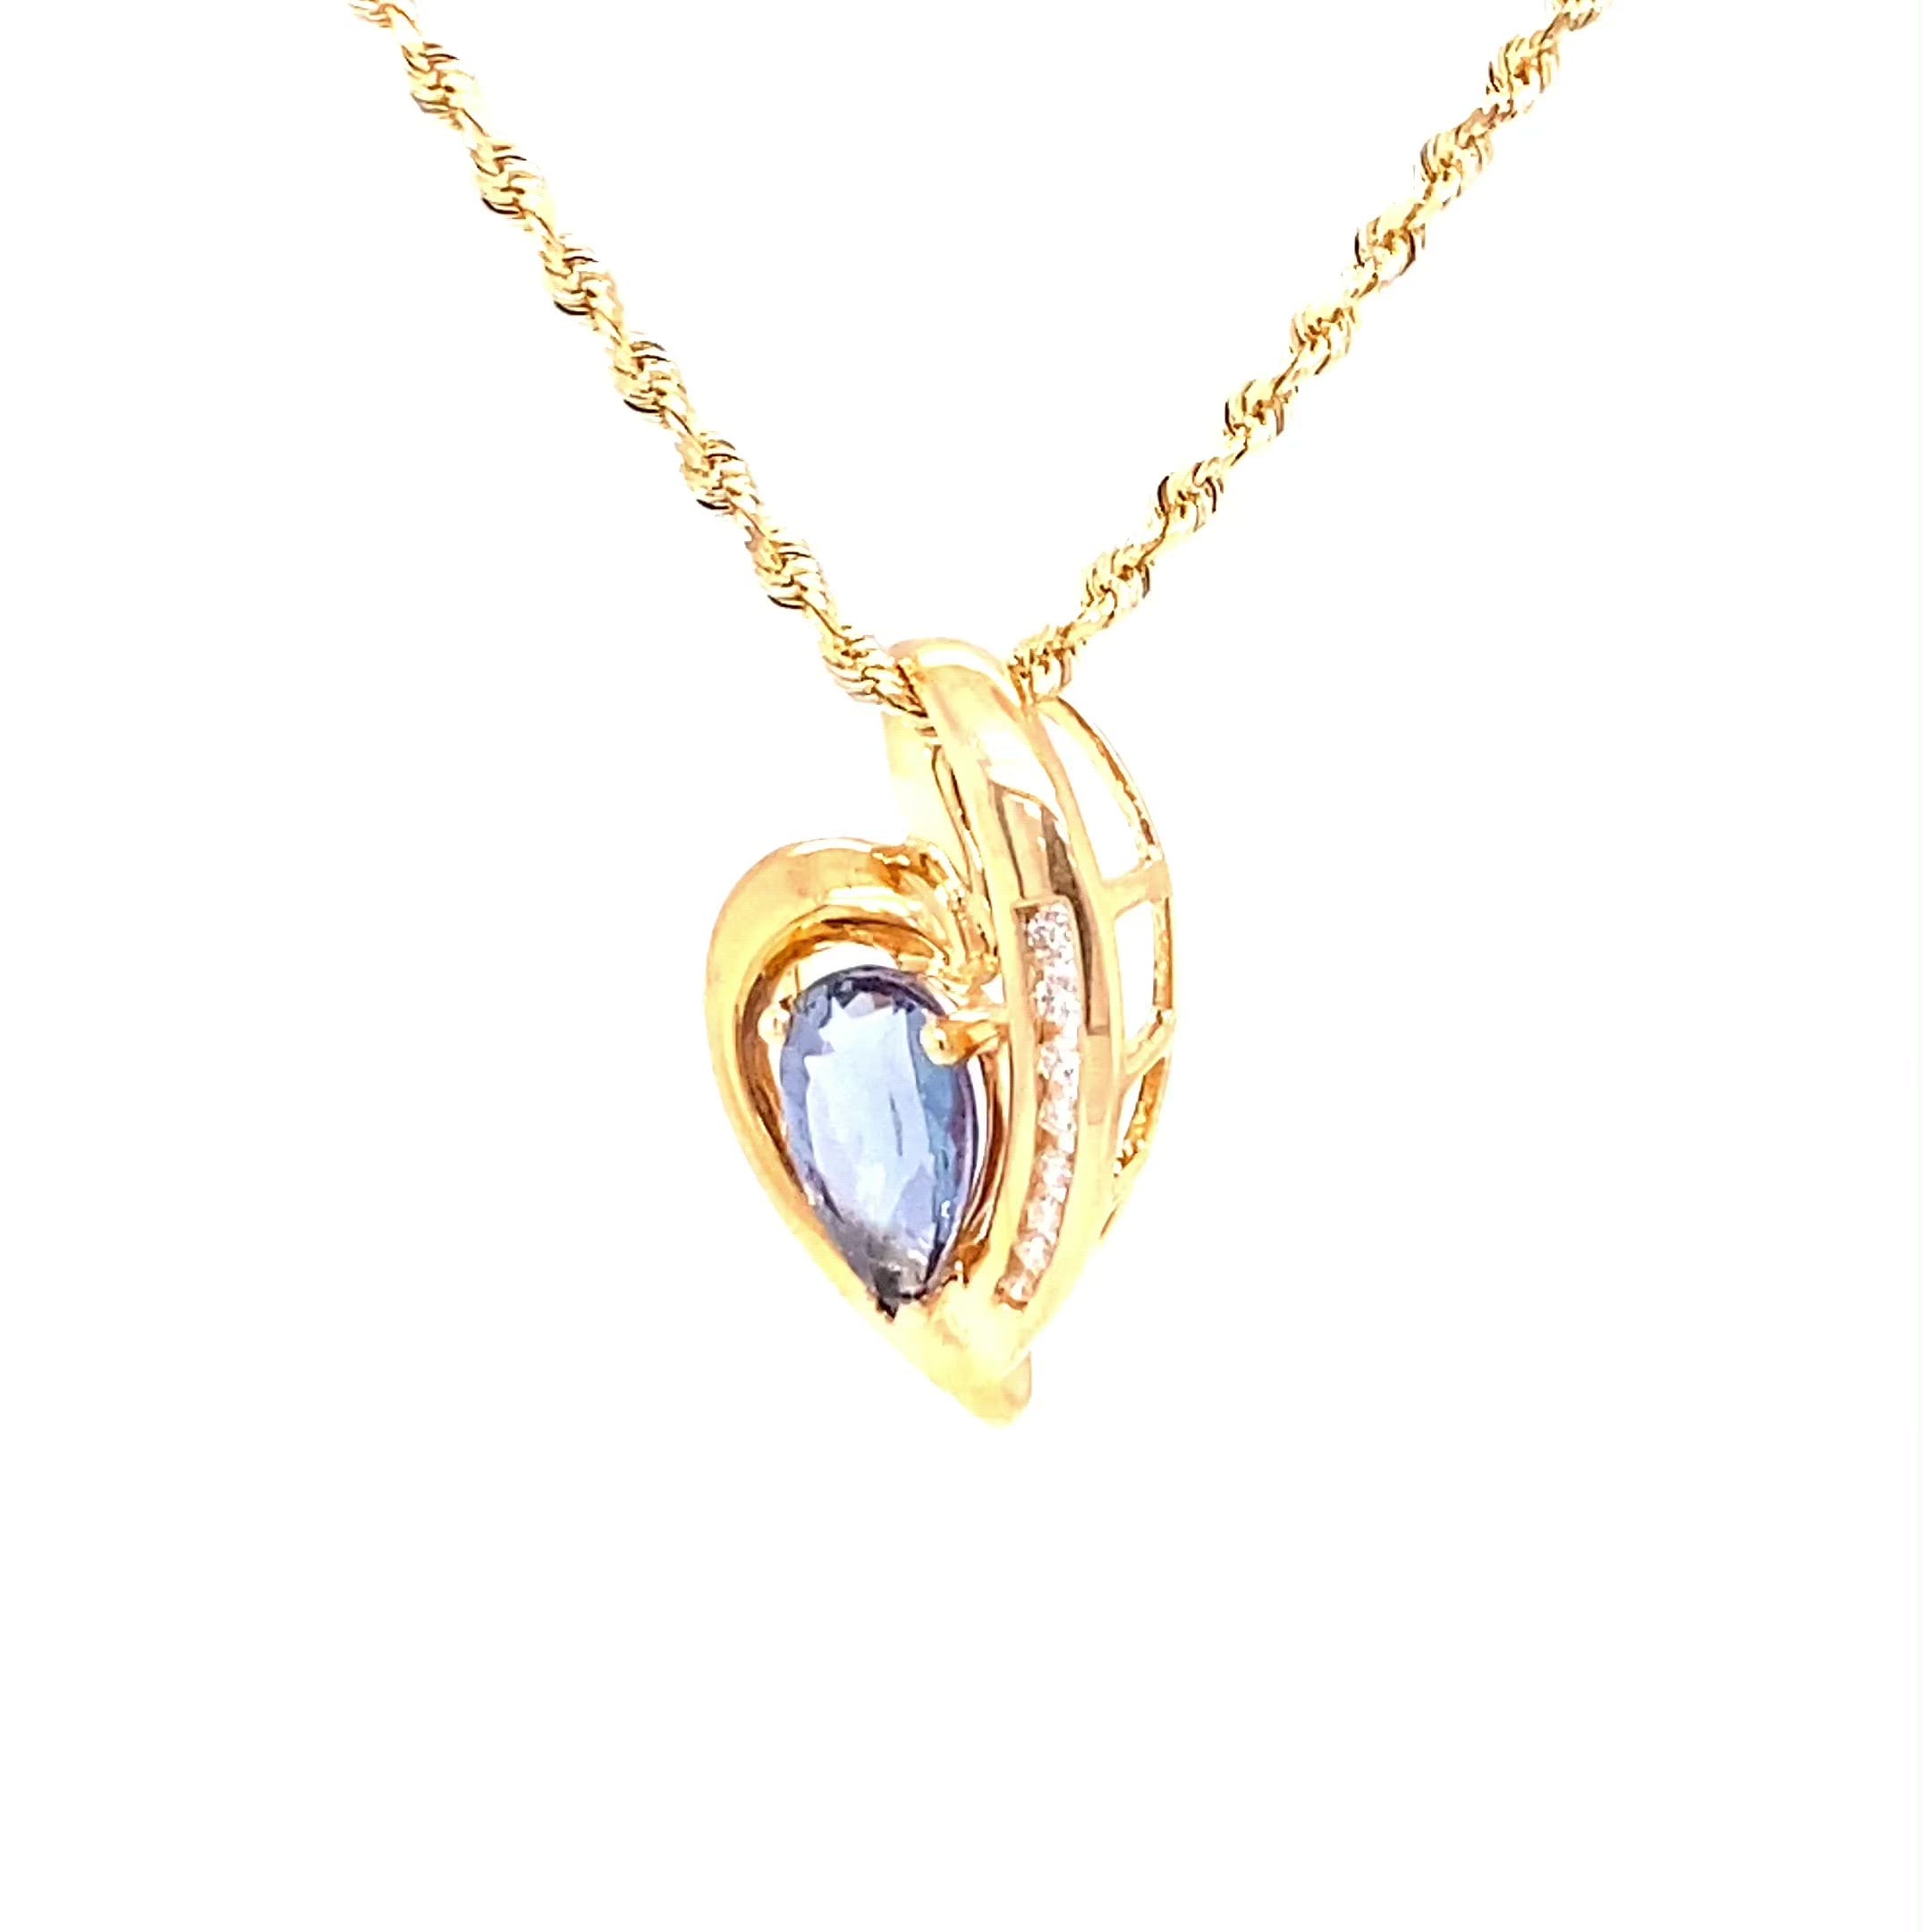 Certified Natural Tanzanite & Diamond Necklace 14K Solid Gold 2.44tcw Pendant Necklace Cocktail Necklace Birthstone Necklace Womens Necklace